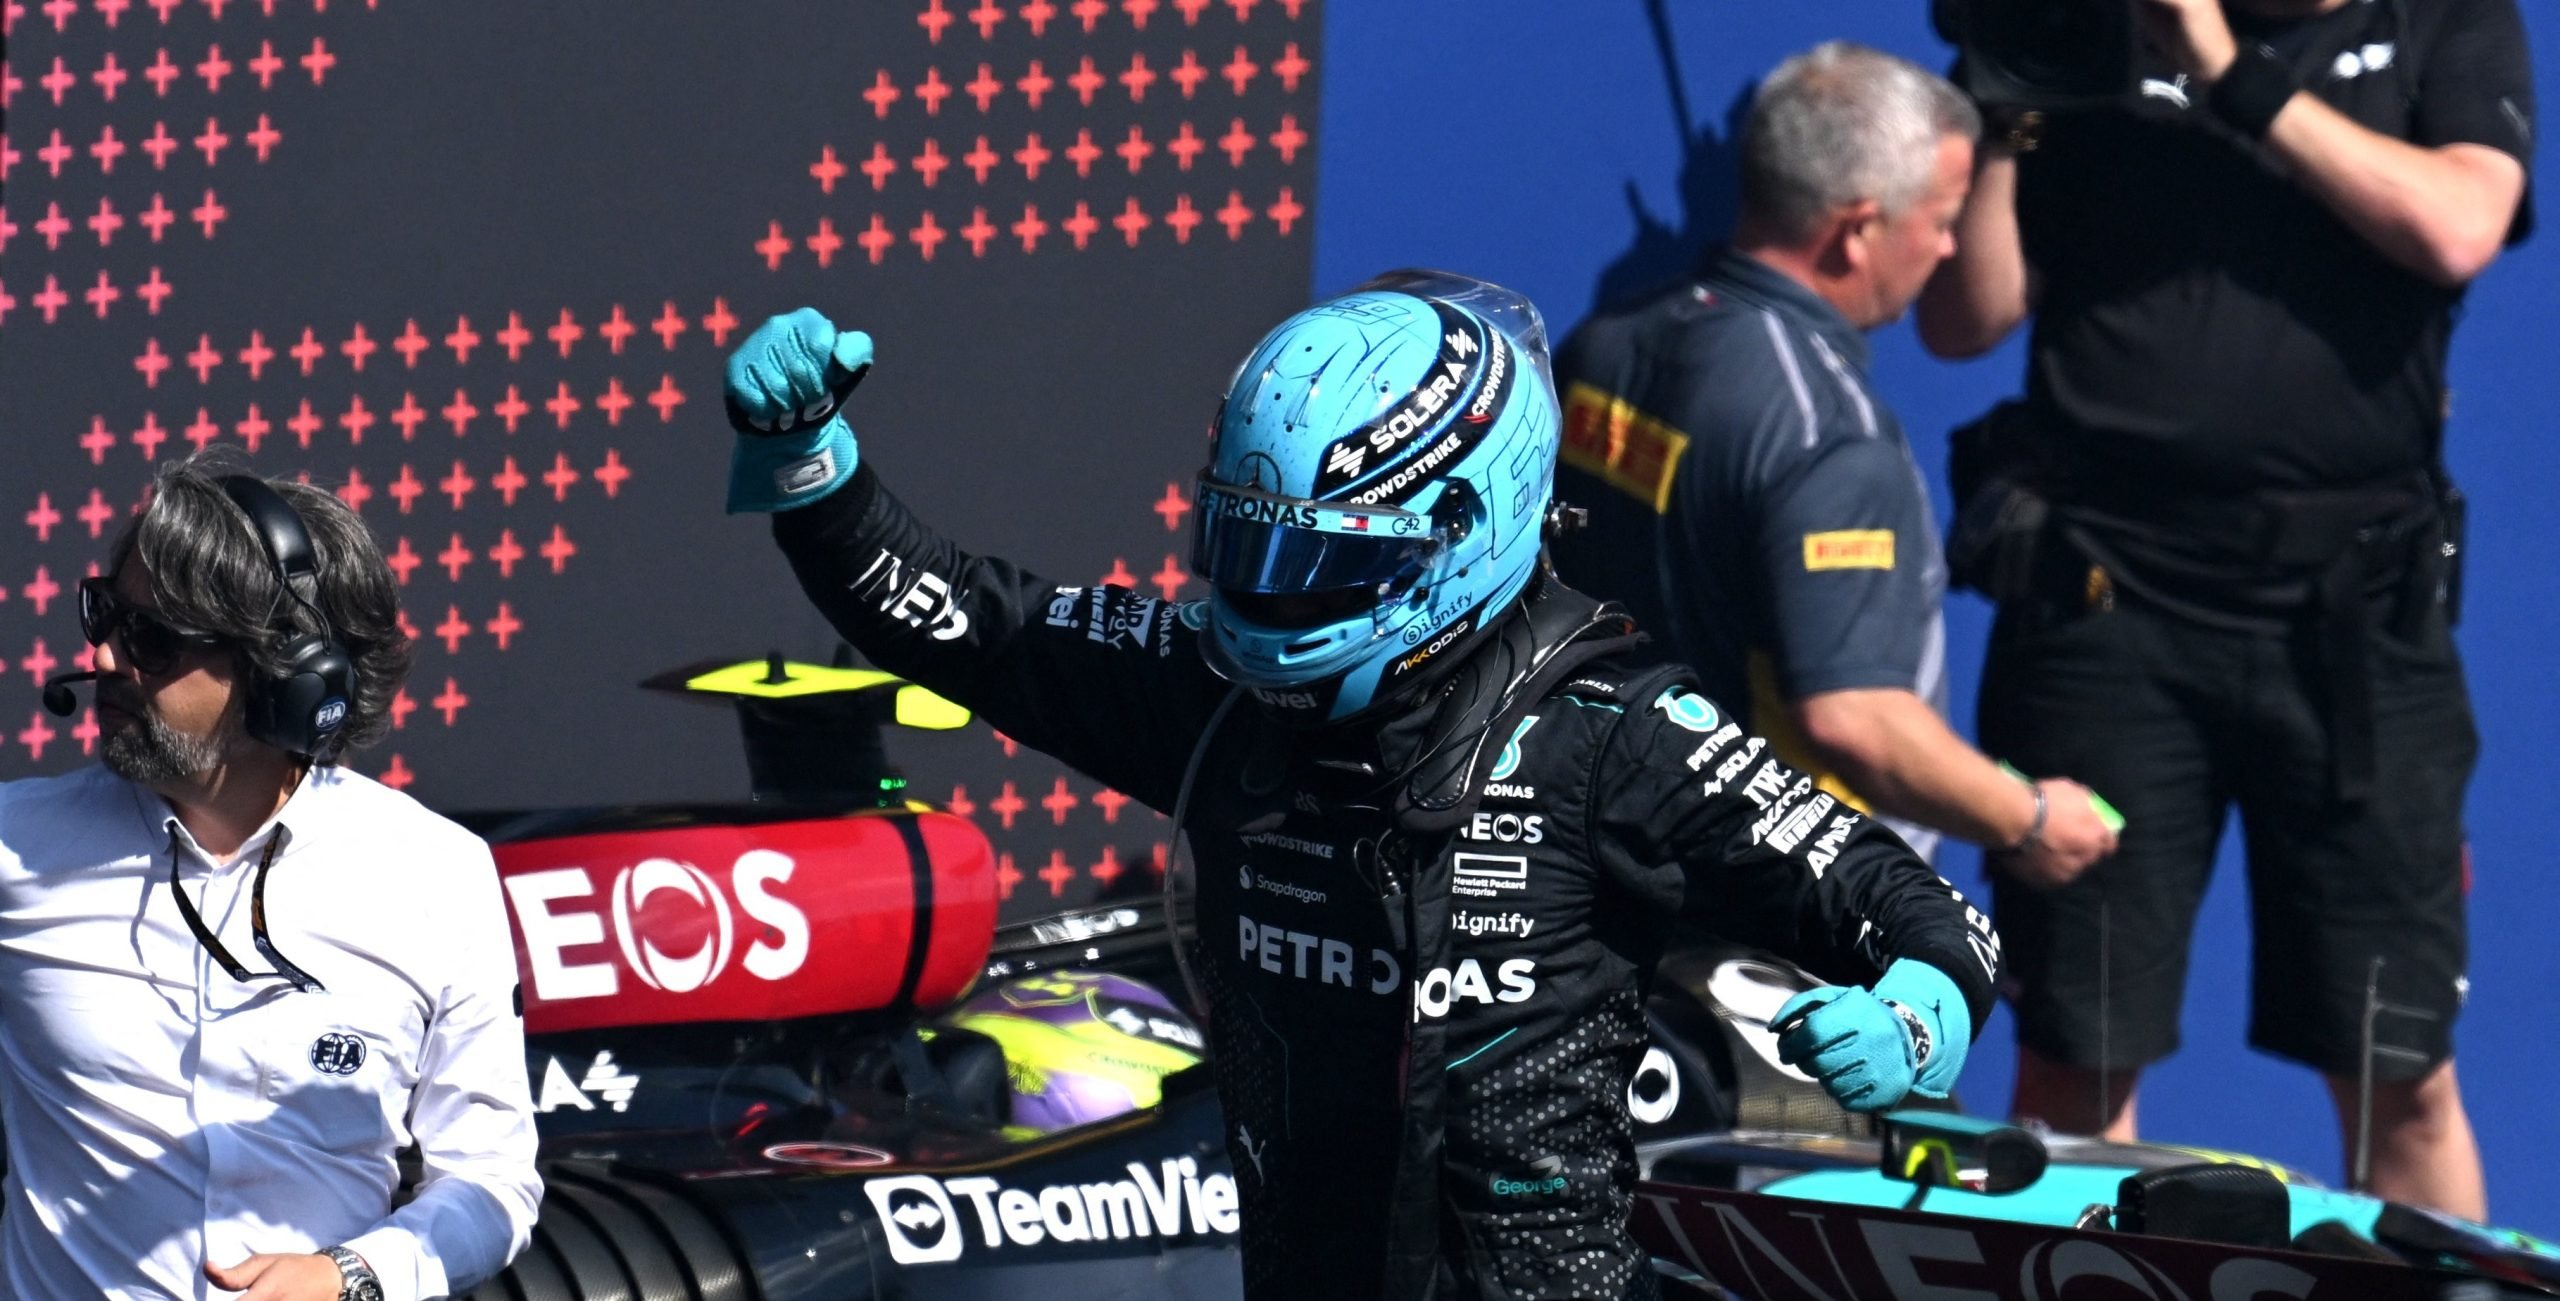 Russell triumphs at the Belgium GP, Mercedes with 1-2 at Spa 8